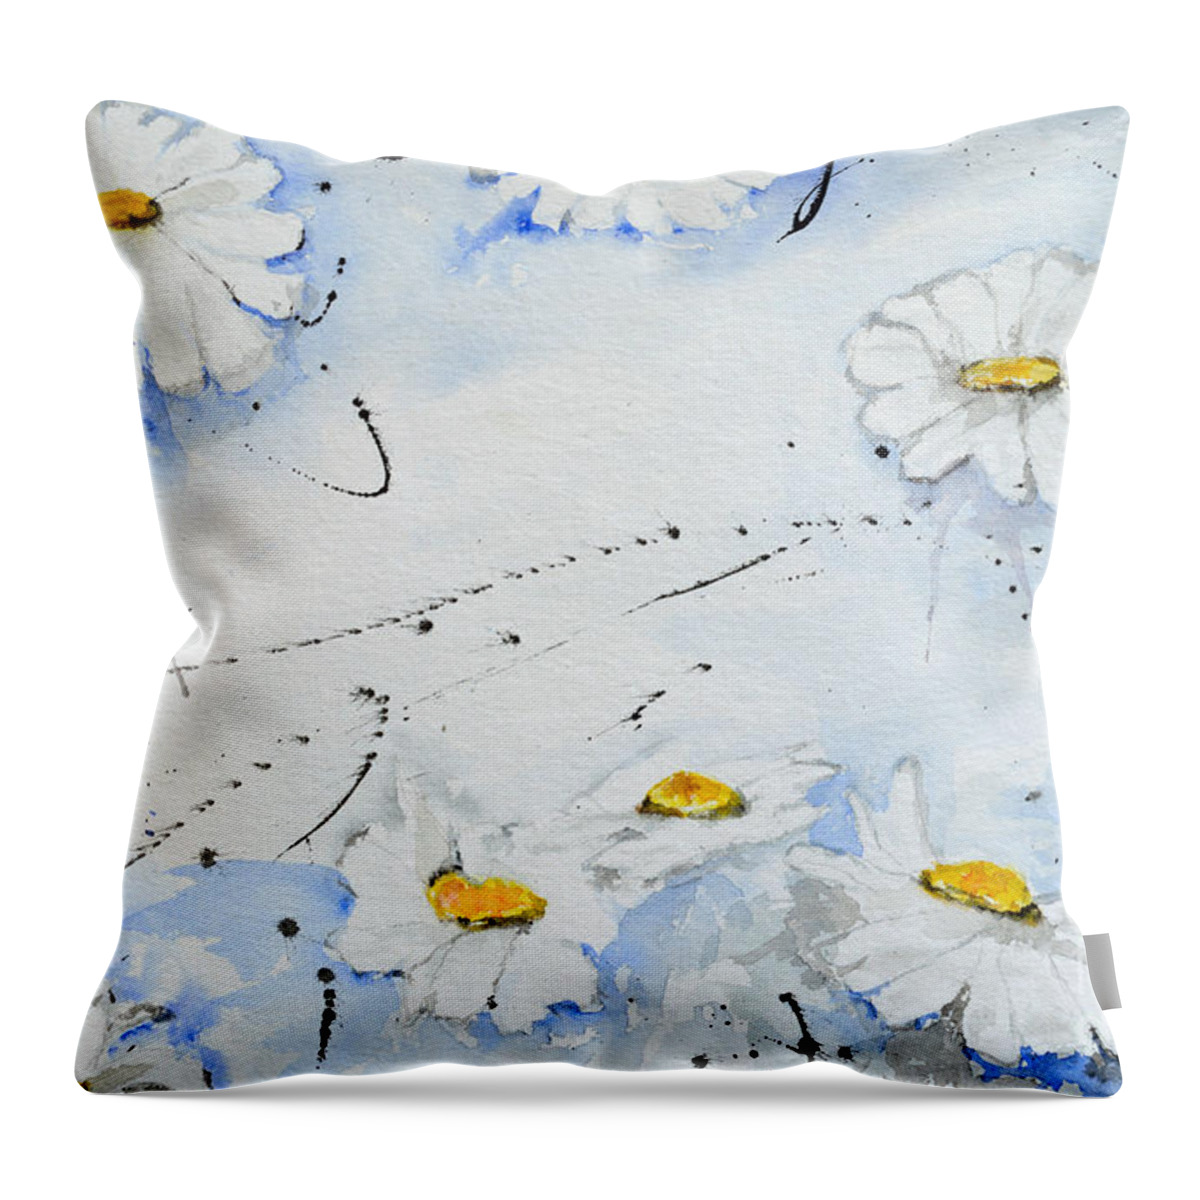 Daisies Throw Pillow featuring the painting Daisies - Flower by Ismeta Gruenwald